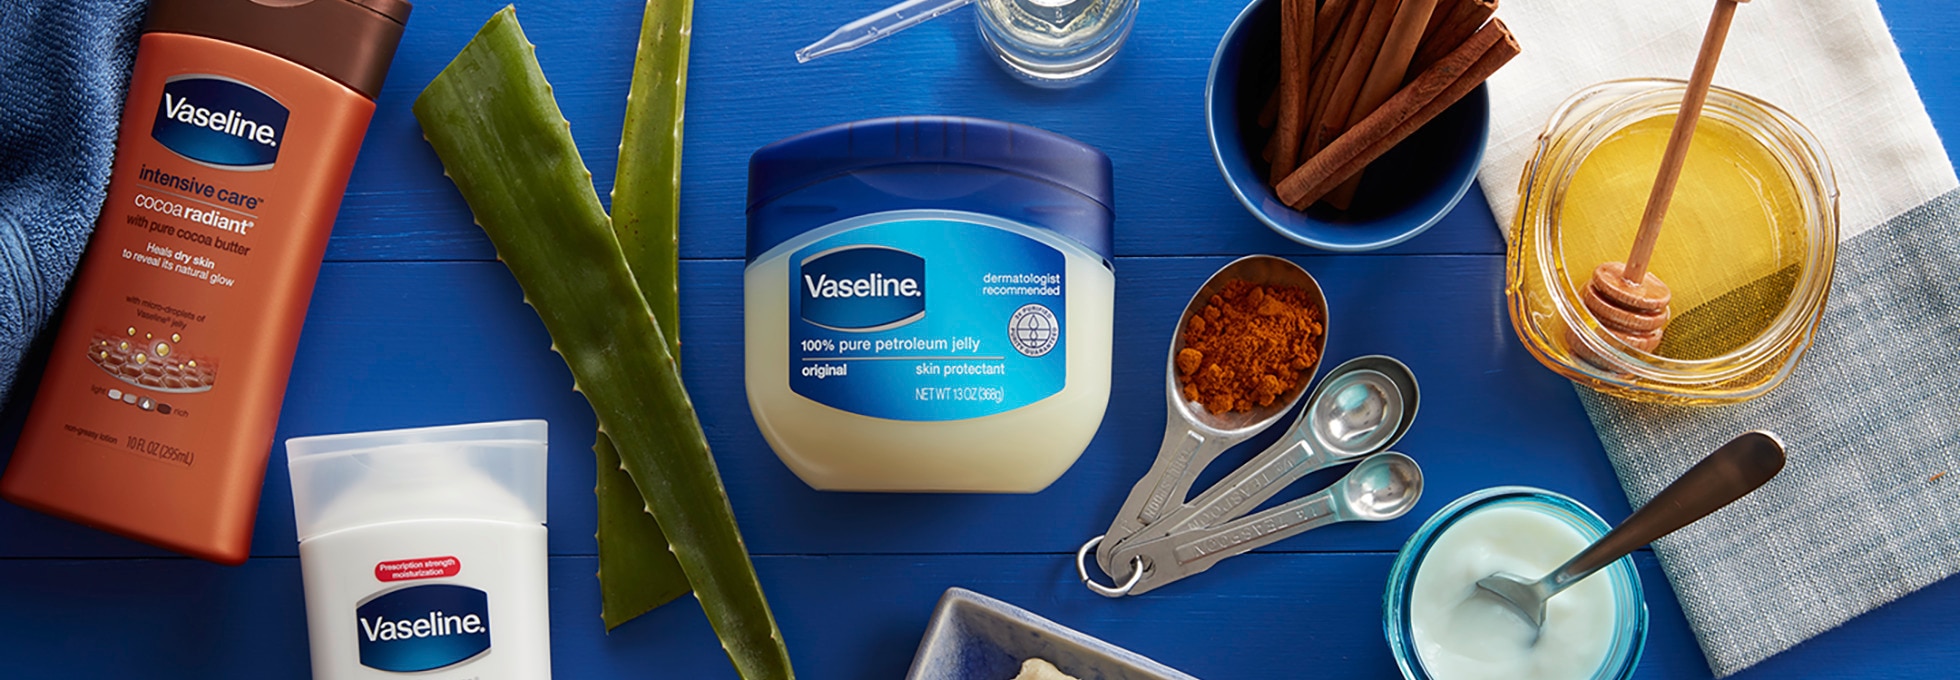 DIY Skin Care for Face and Body | Vaseline